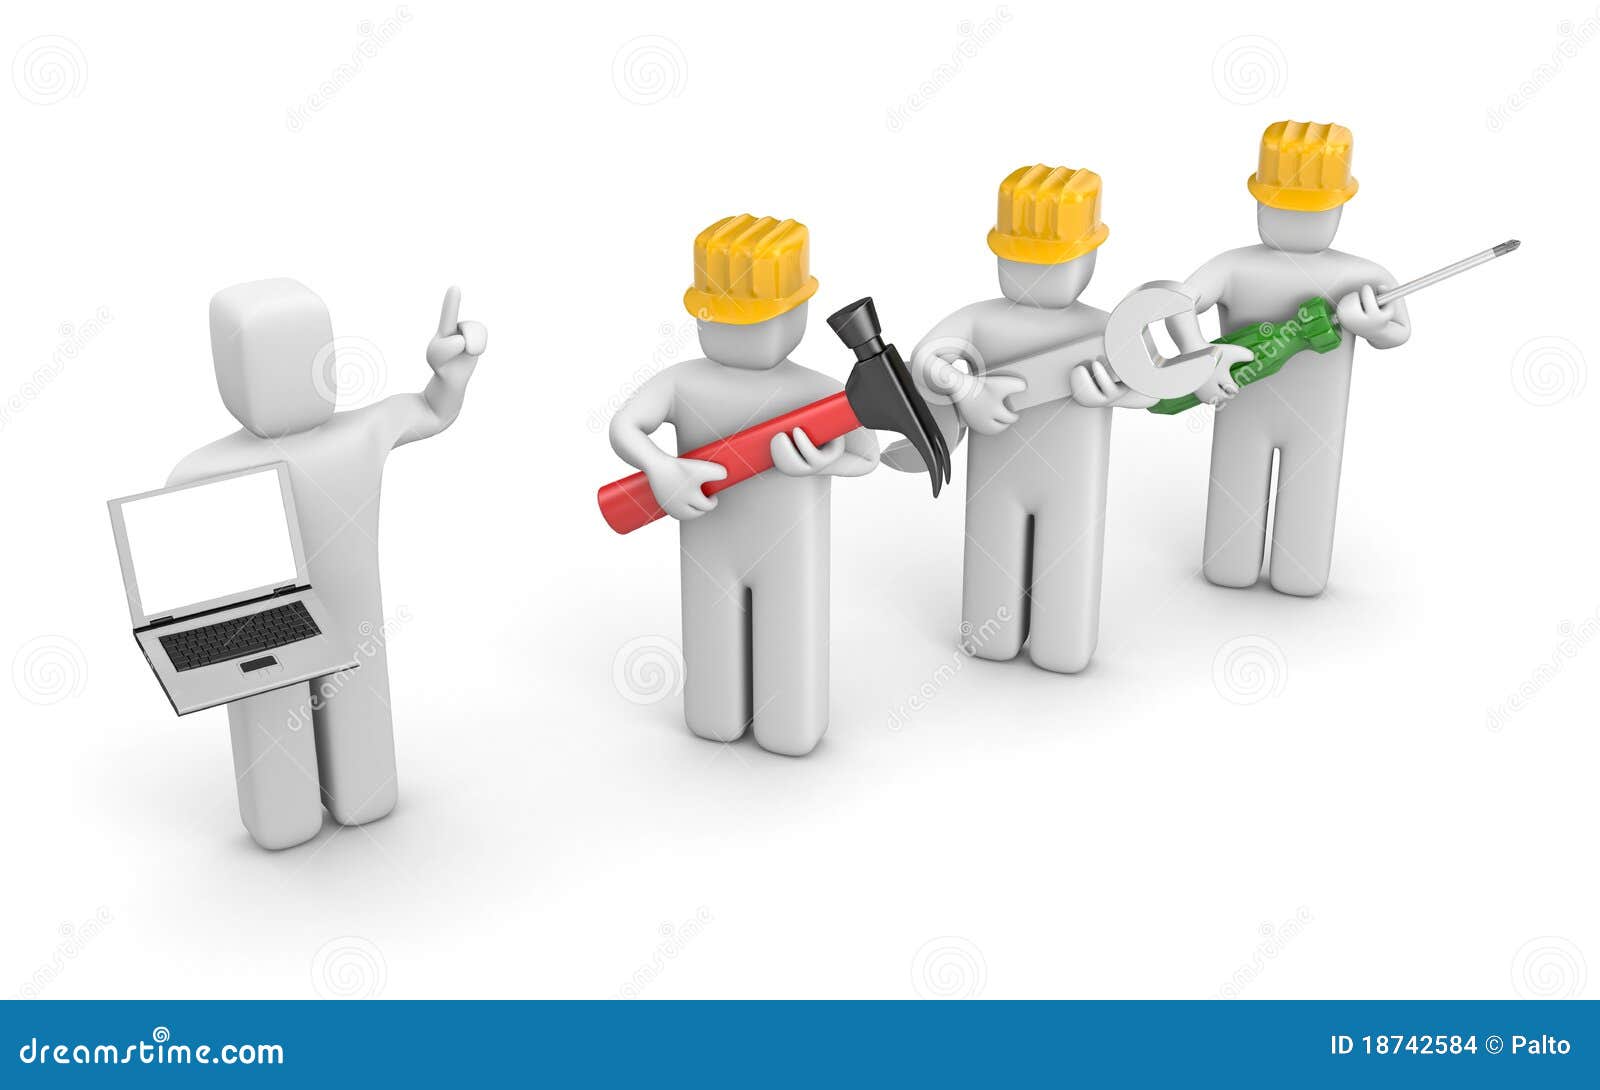 industrial automation clipart - photo #10